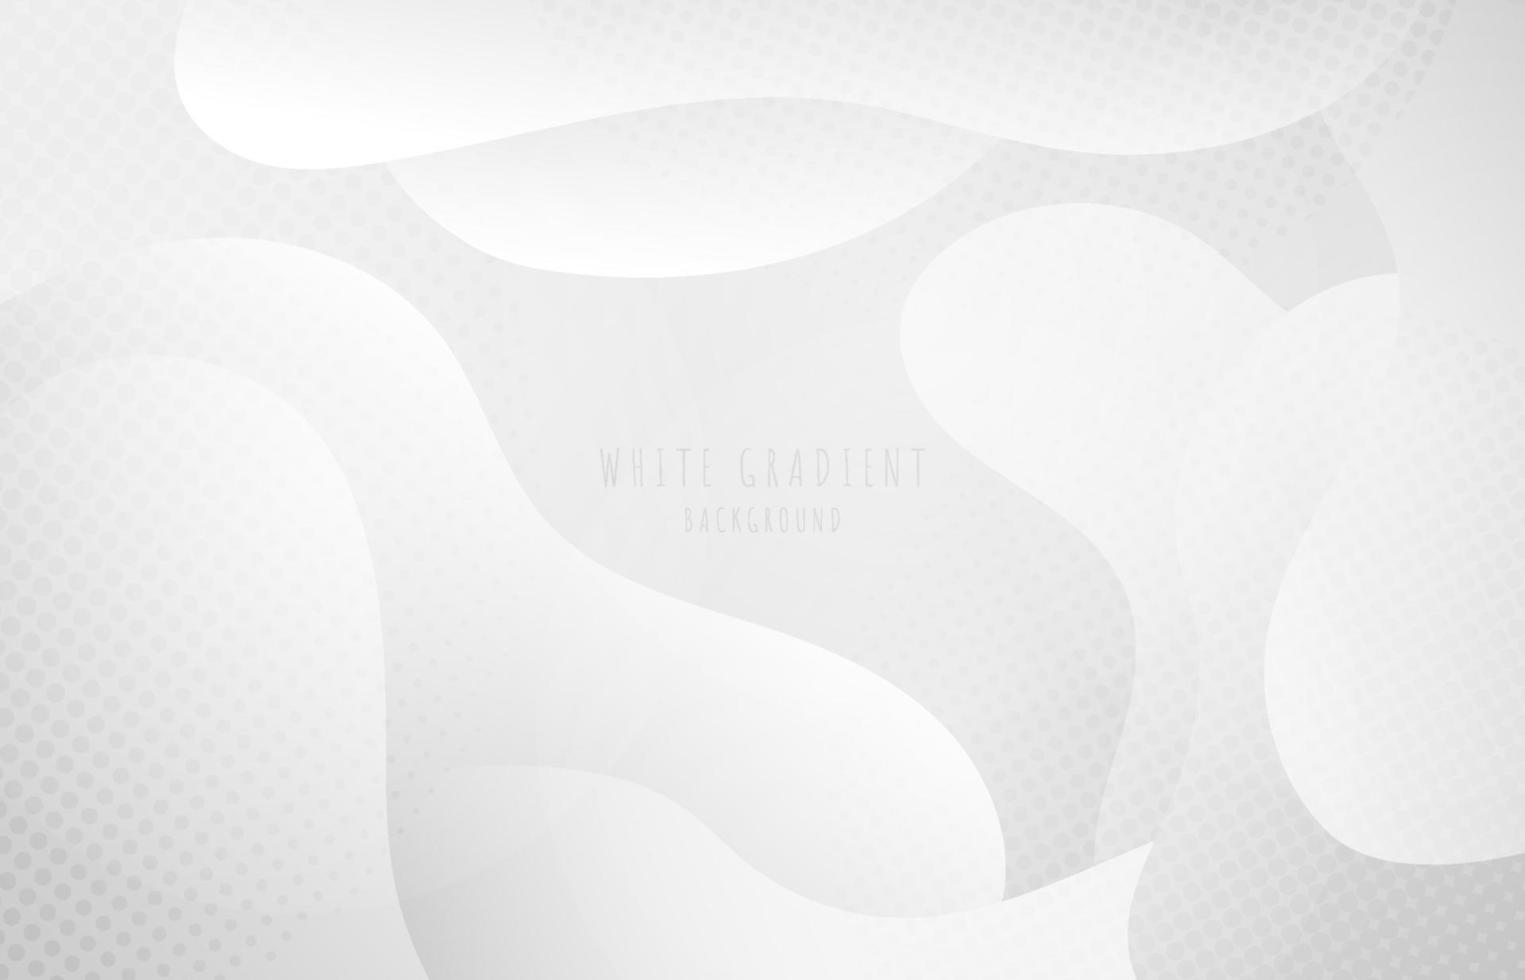 Abstract gradient white organic fluid template with dot halftone artwork style. Overlapping for white style background. Illustration vector